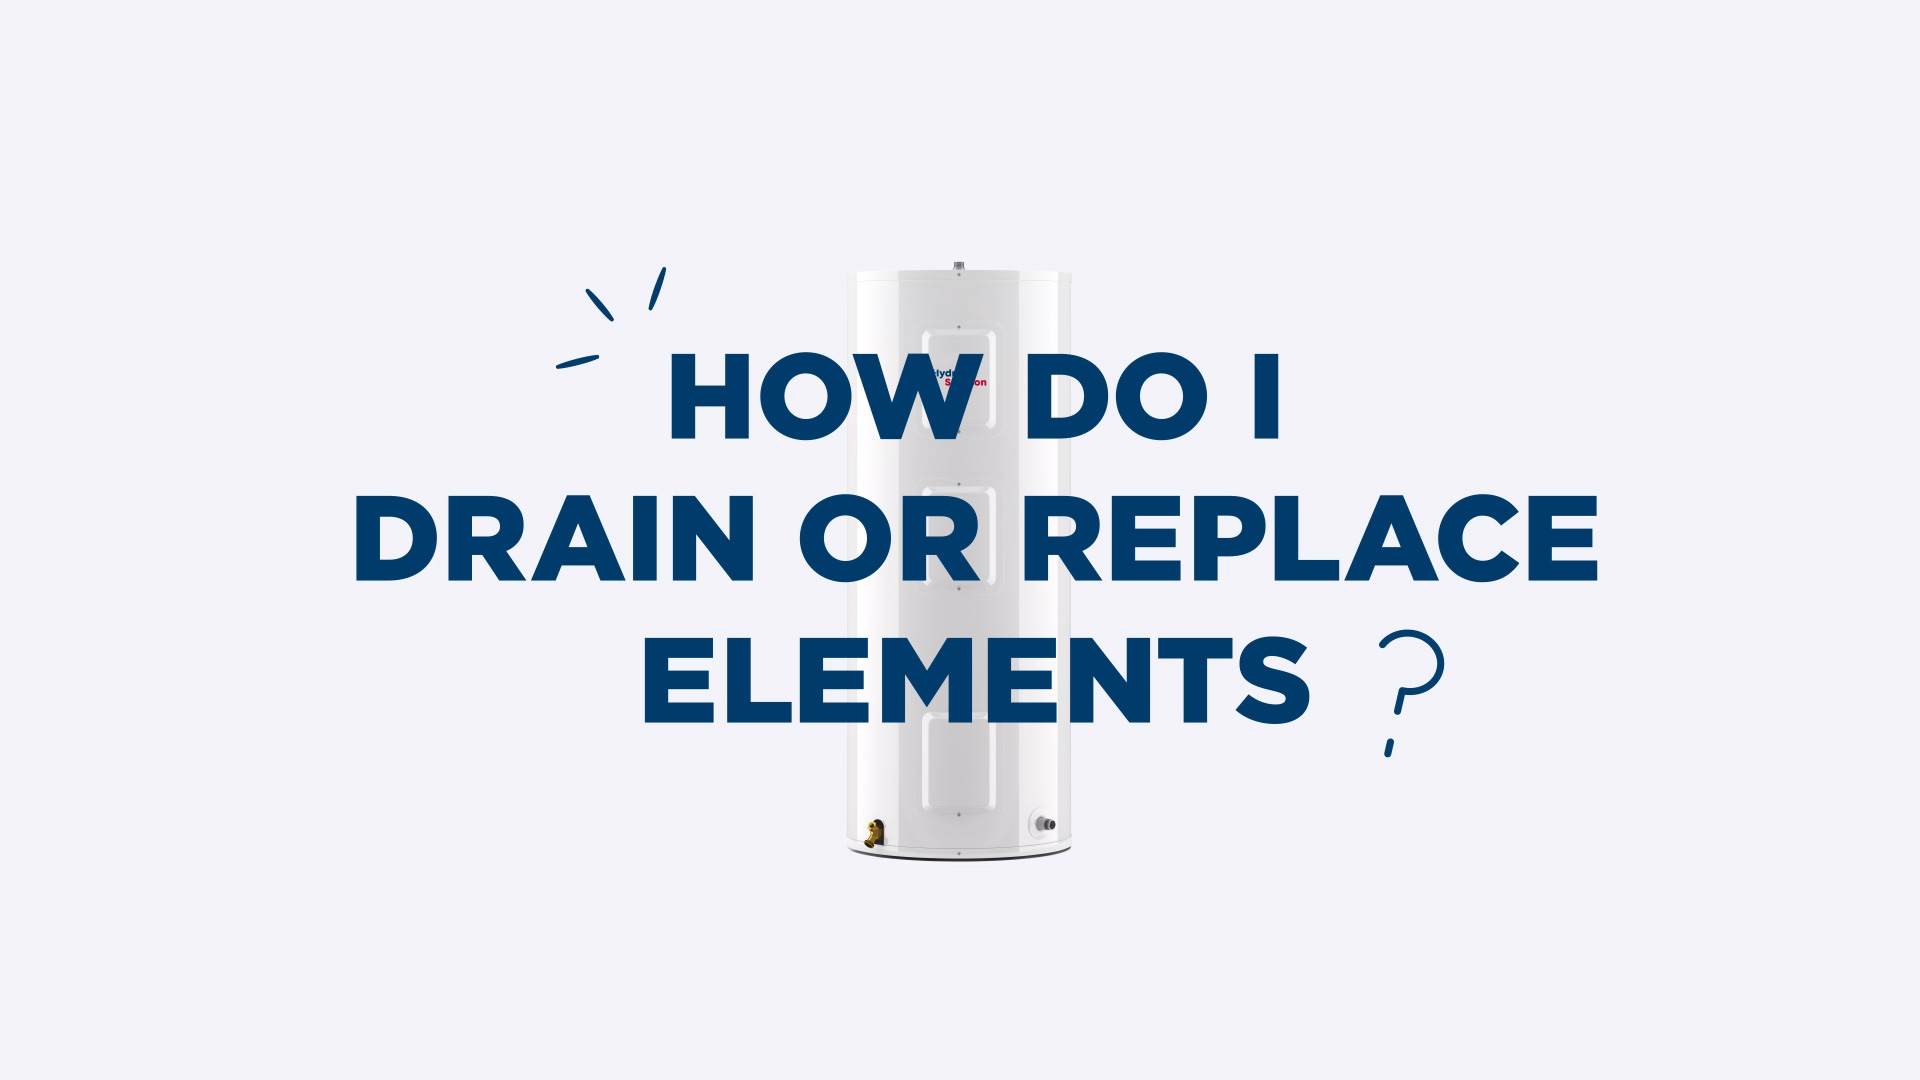 How do I drain the water heater or change the elements?